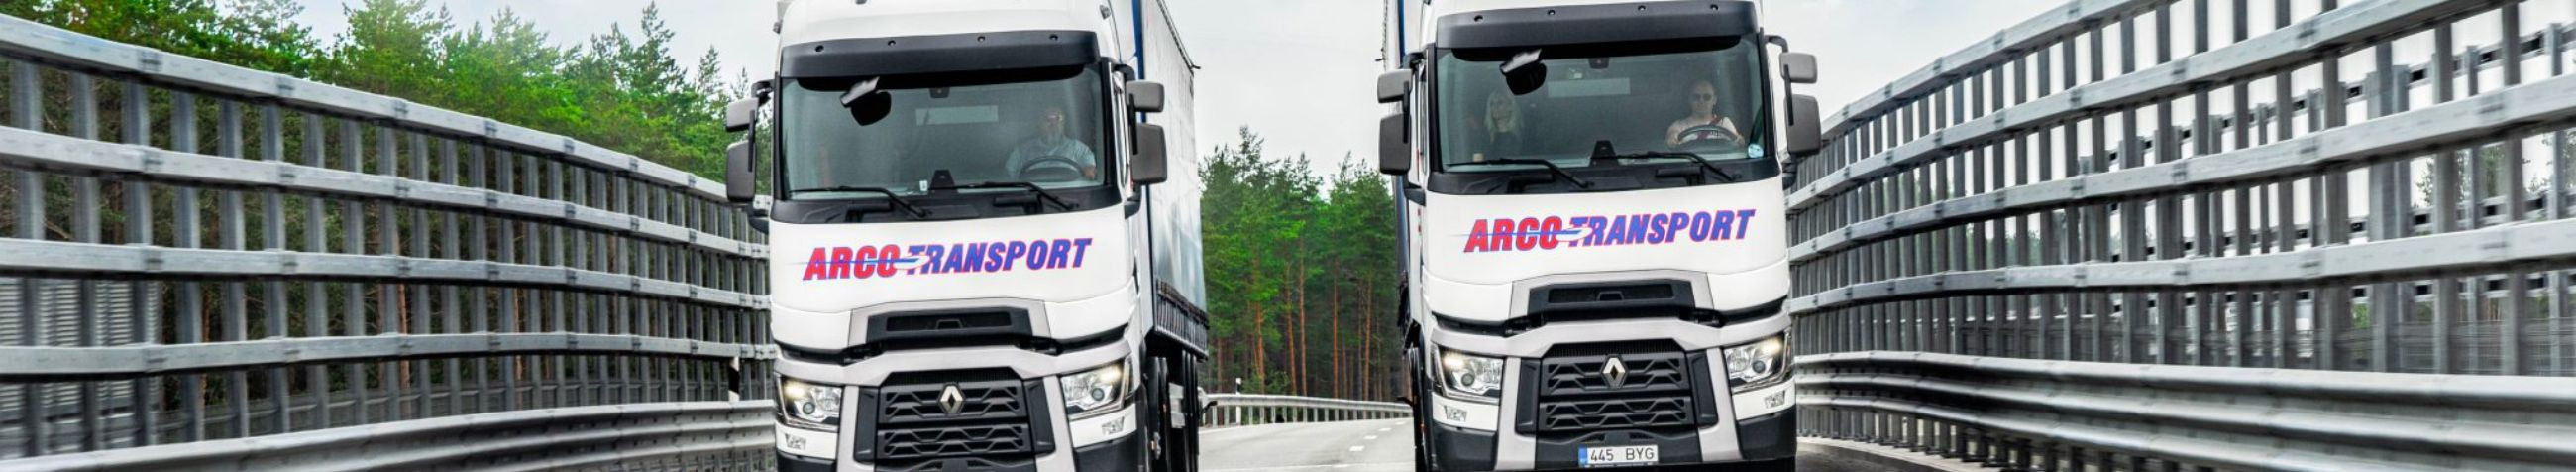 Arco Transport is a logistics company engaged in the forwarding of goods. We help you if you need international freight transport to or from Estonia.